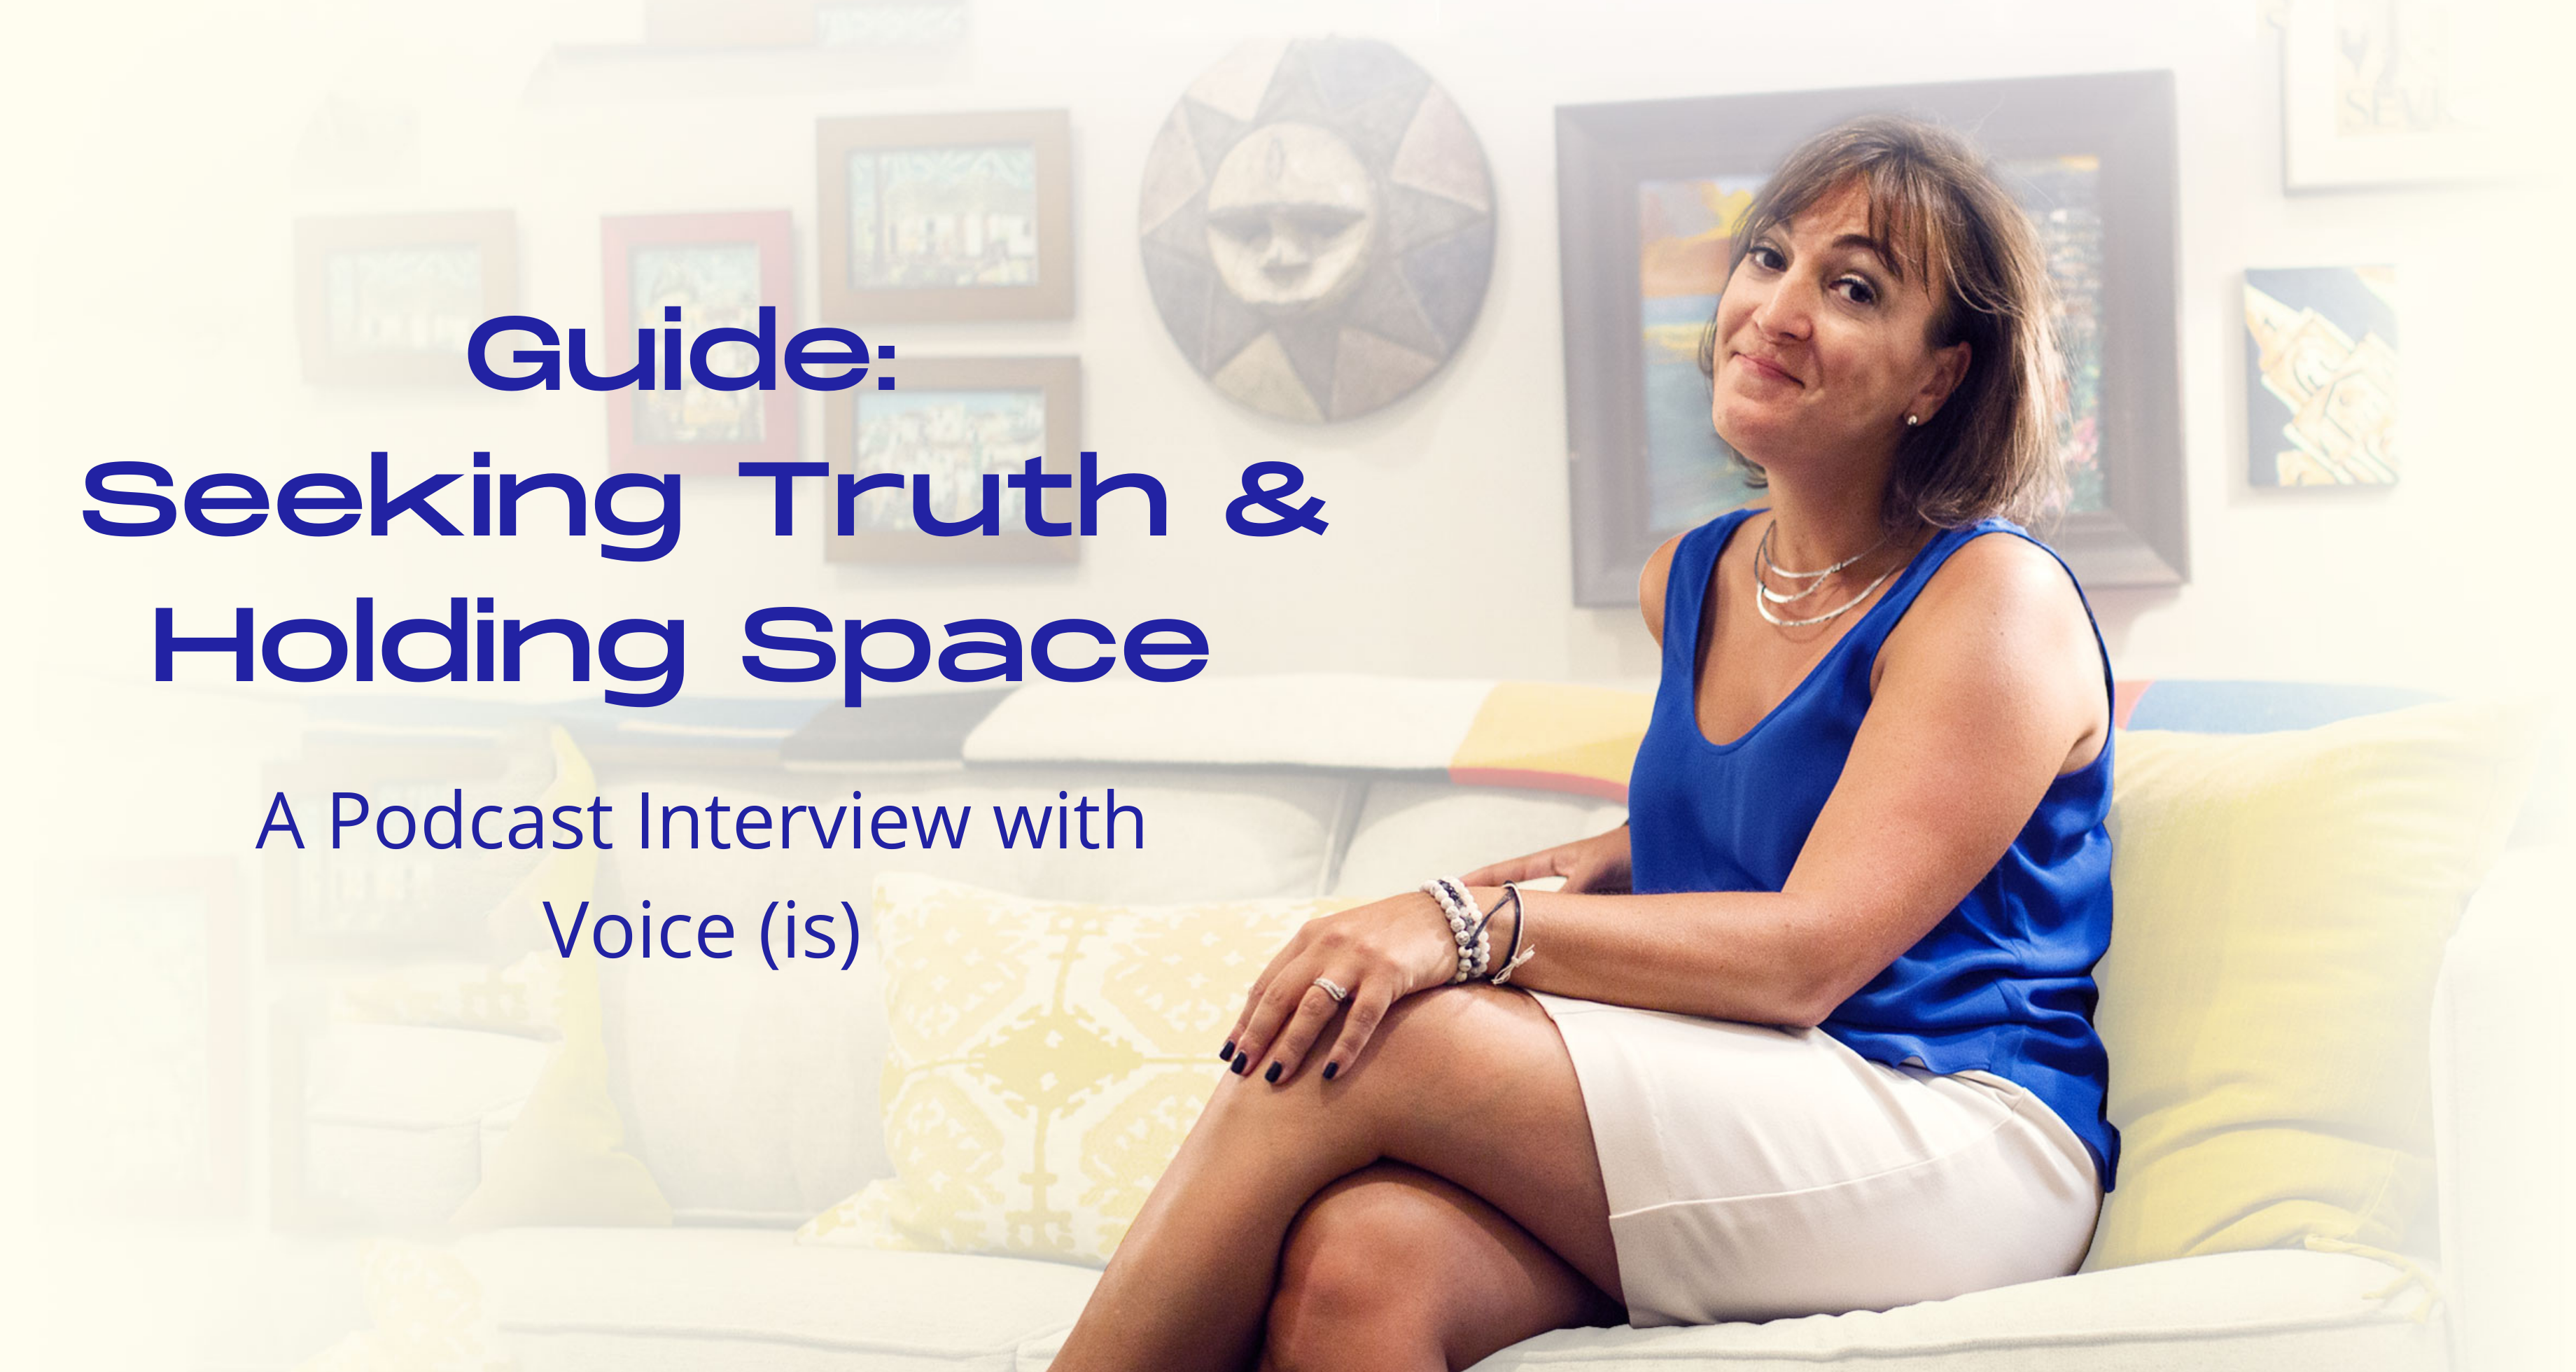 Guide: A Podcast Interview on Seeking Truth